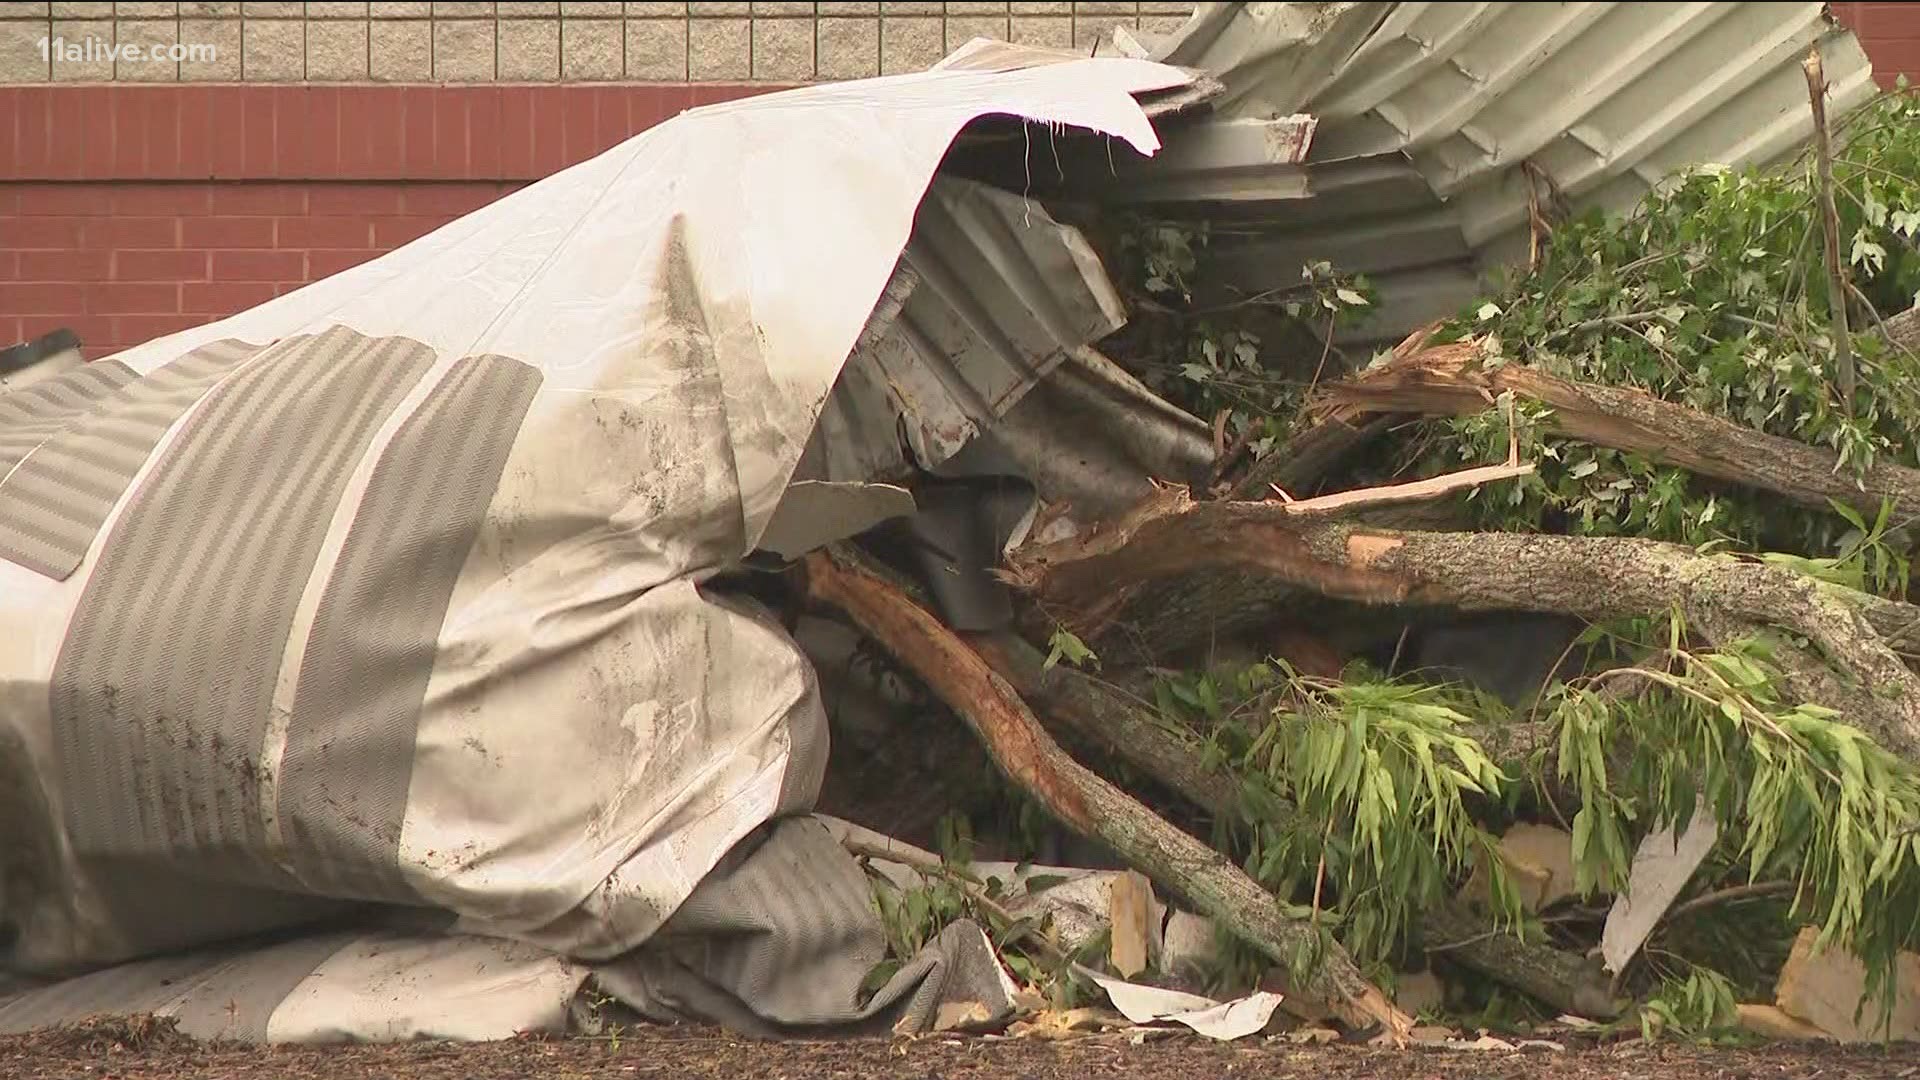 The National Weather Service is surveying the damage left behind from Monday's storms